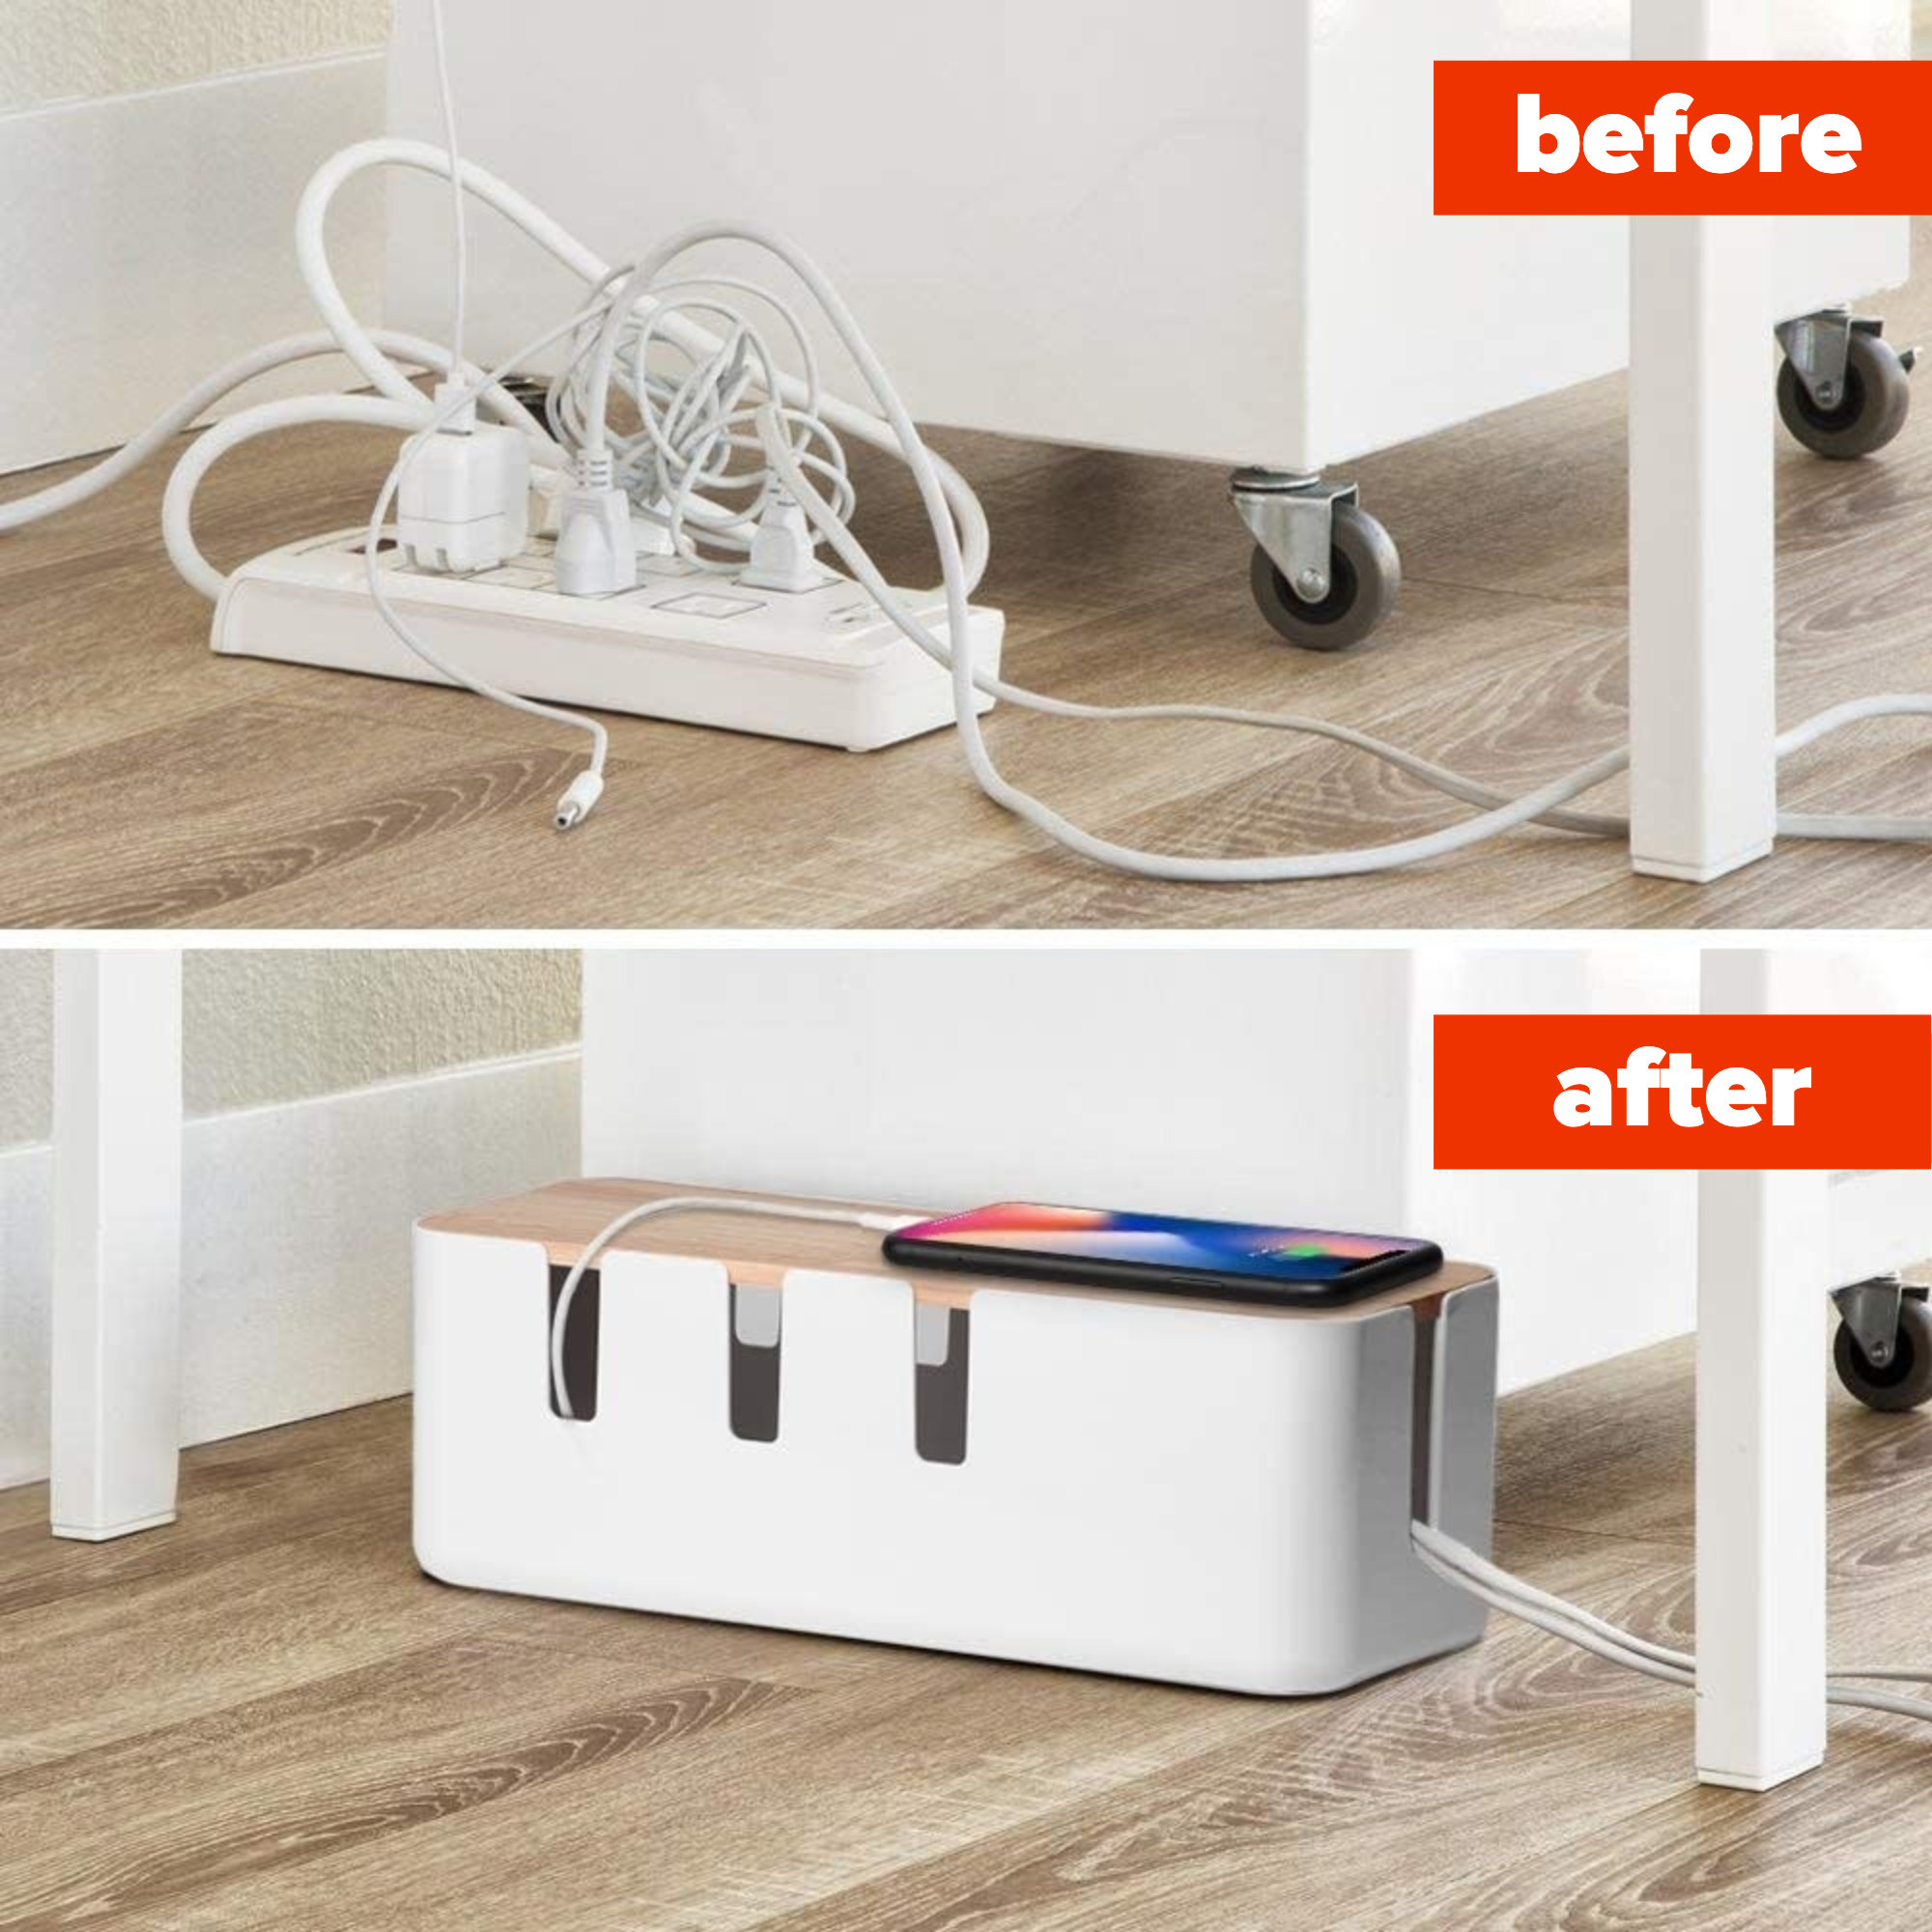 a before image of a messy power bar next to the after image of the power management box concealing the messy wires